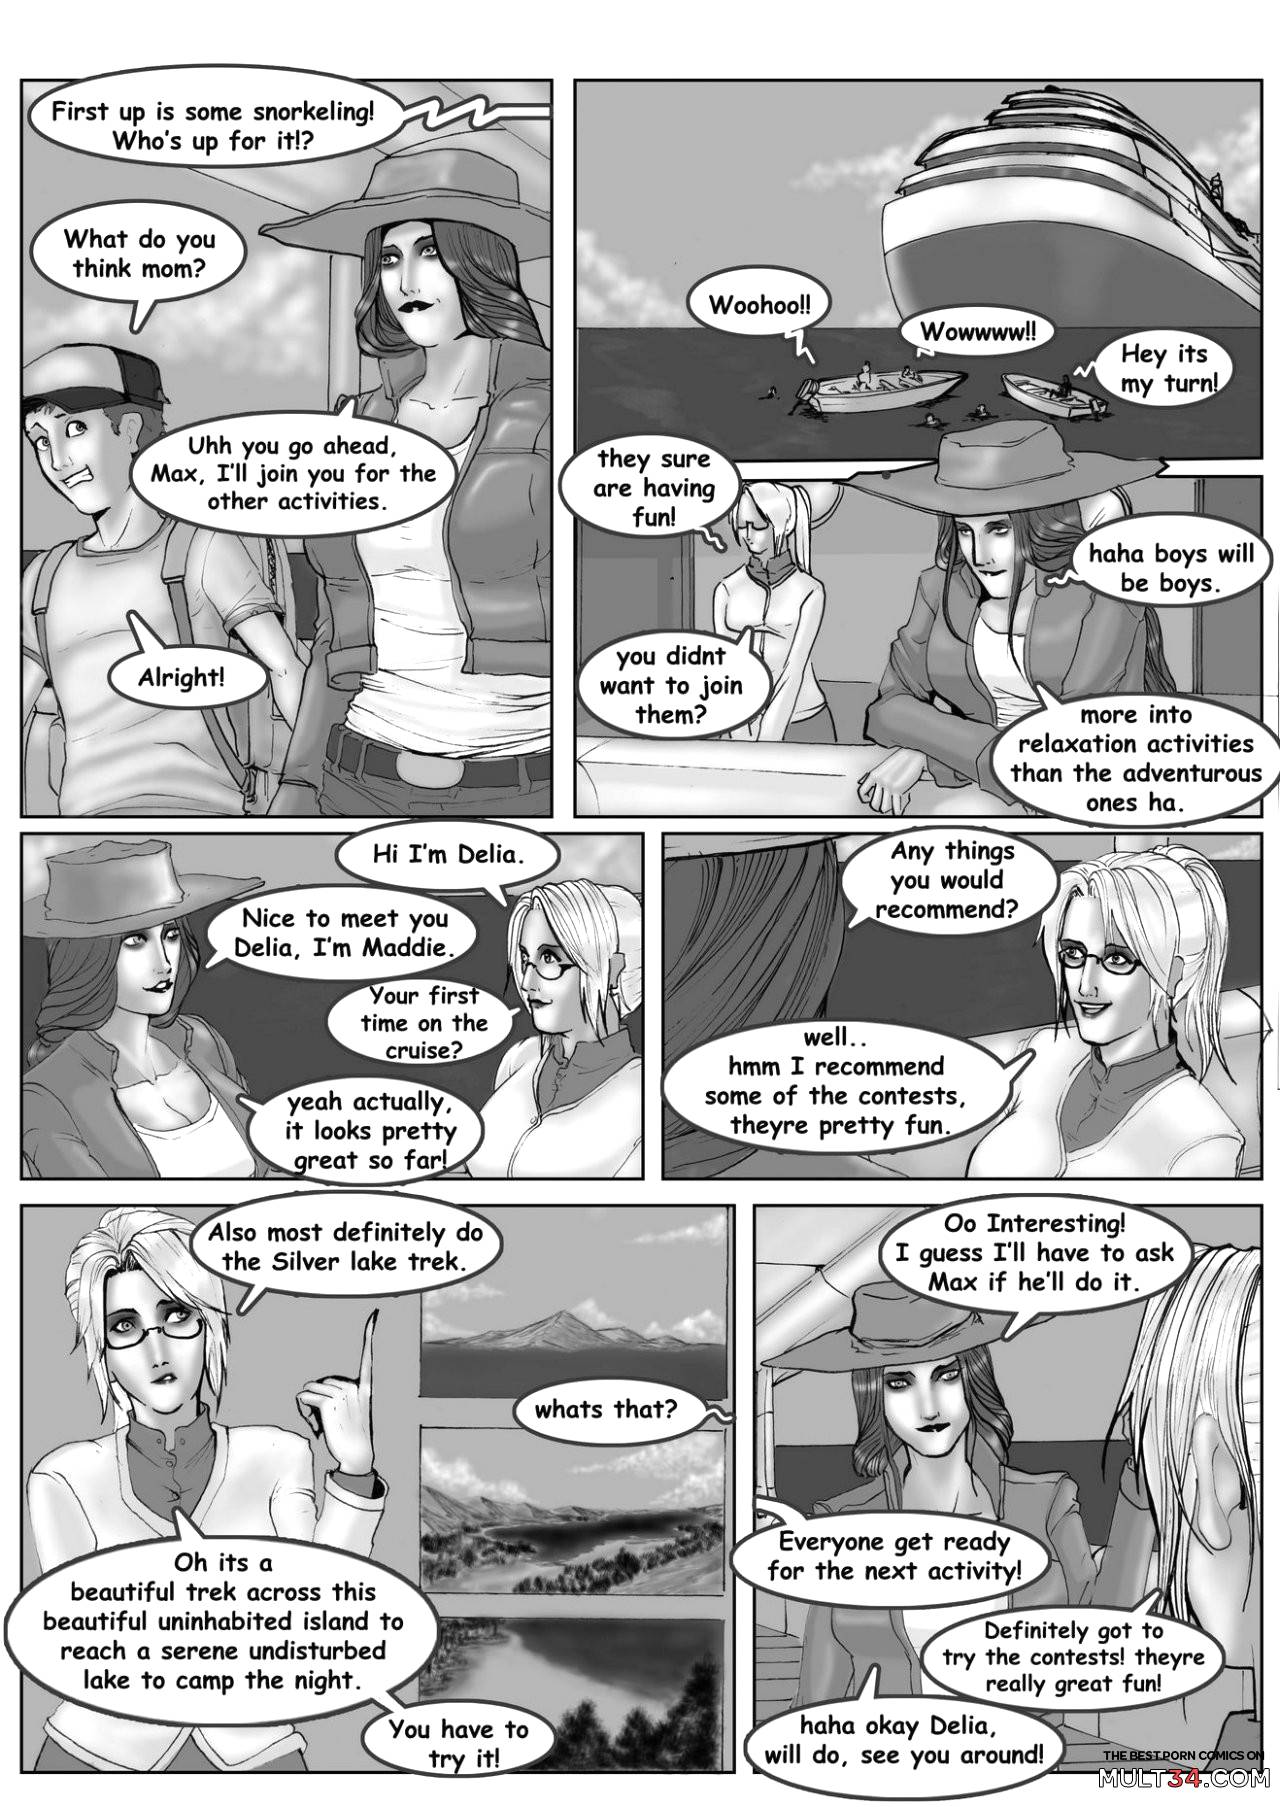 Max and Maddie's Island Quest: Part 1: Jocasta page 8